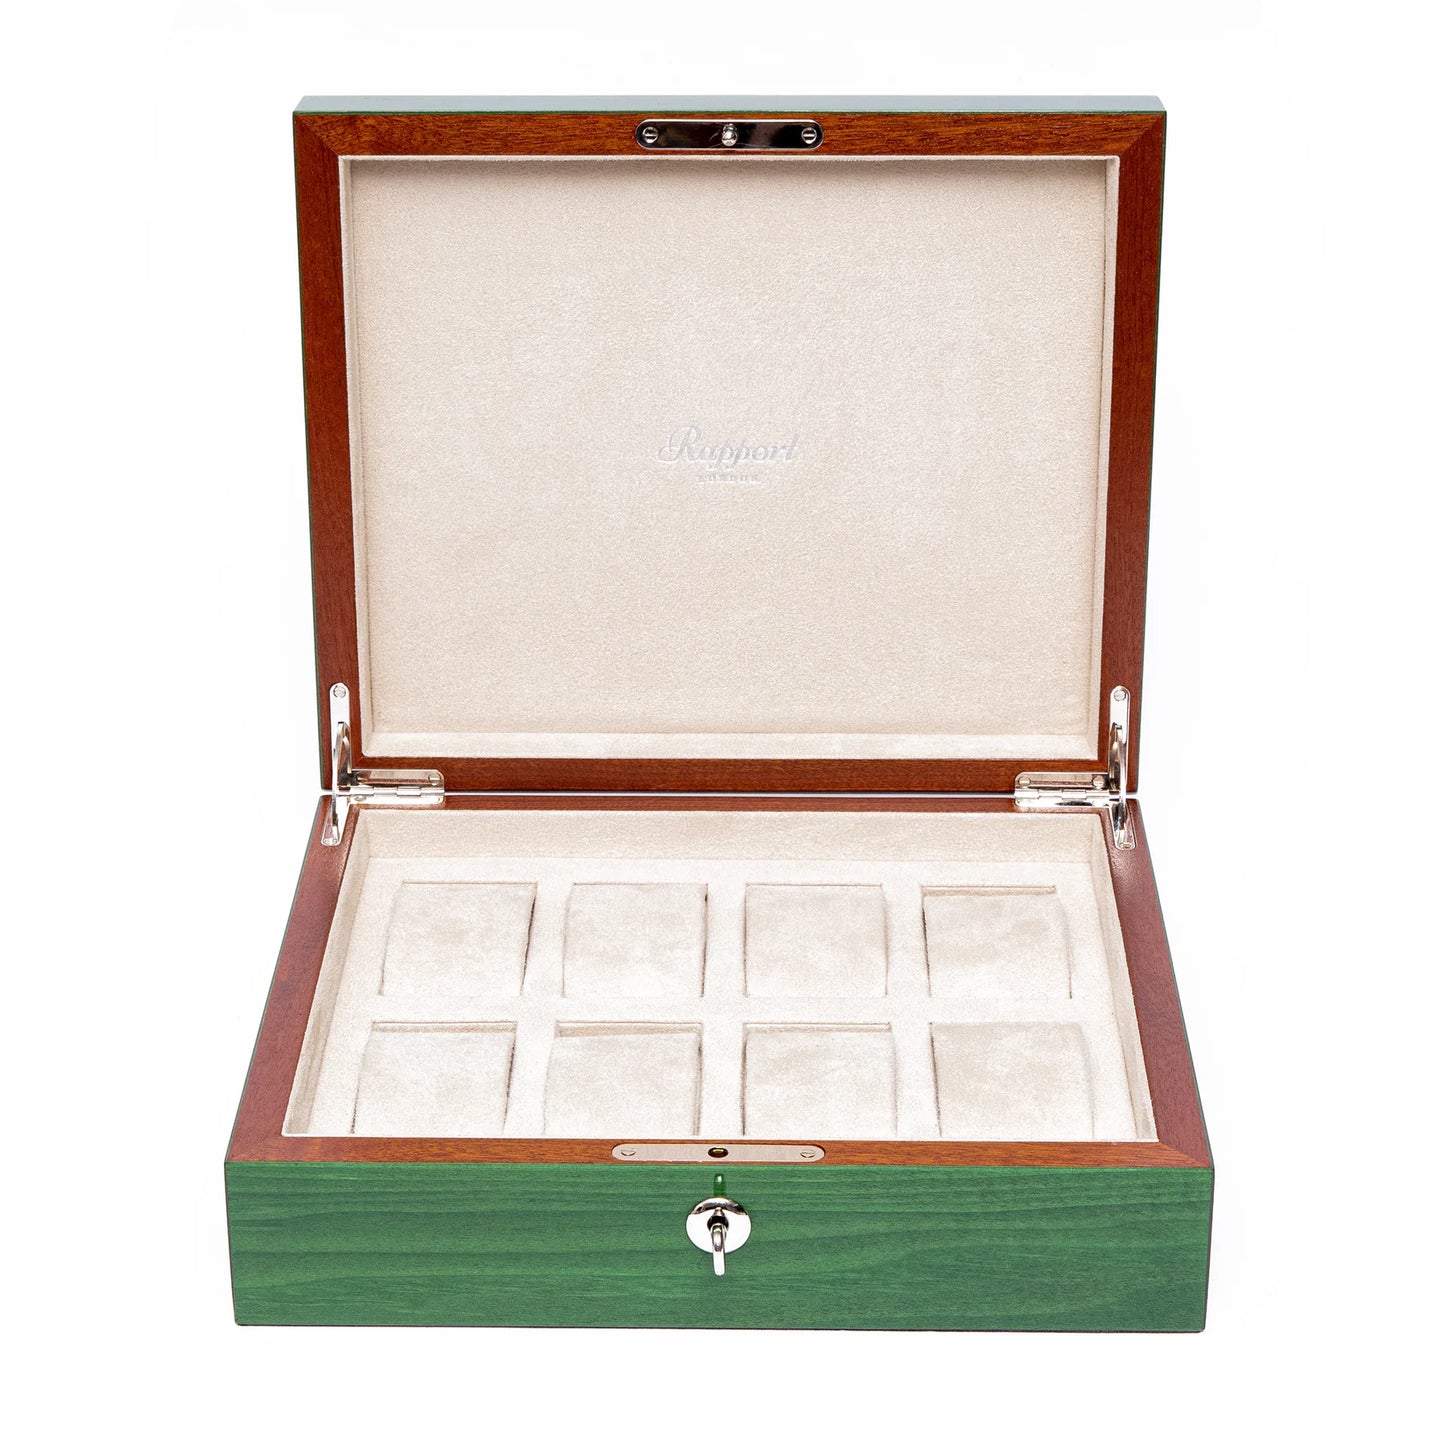 Heritage 8 Watch Collector Box - Green